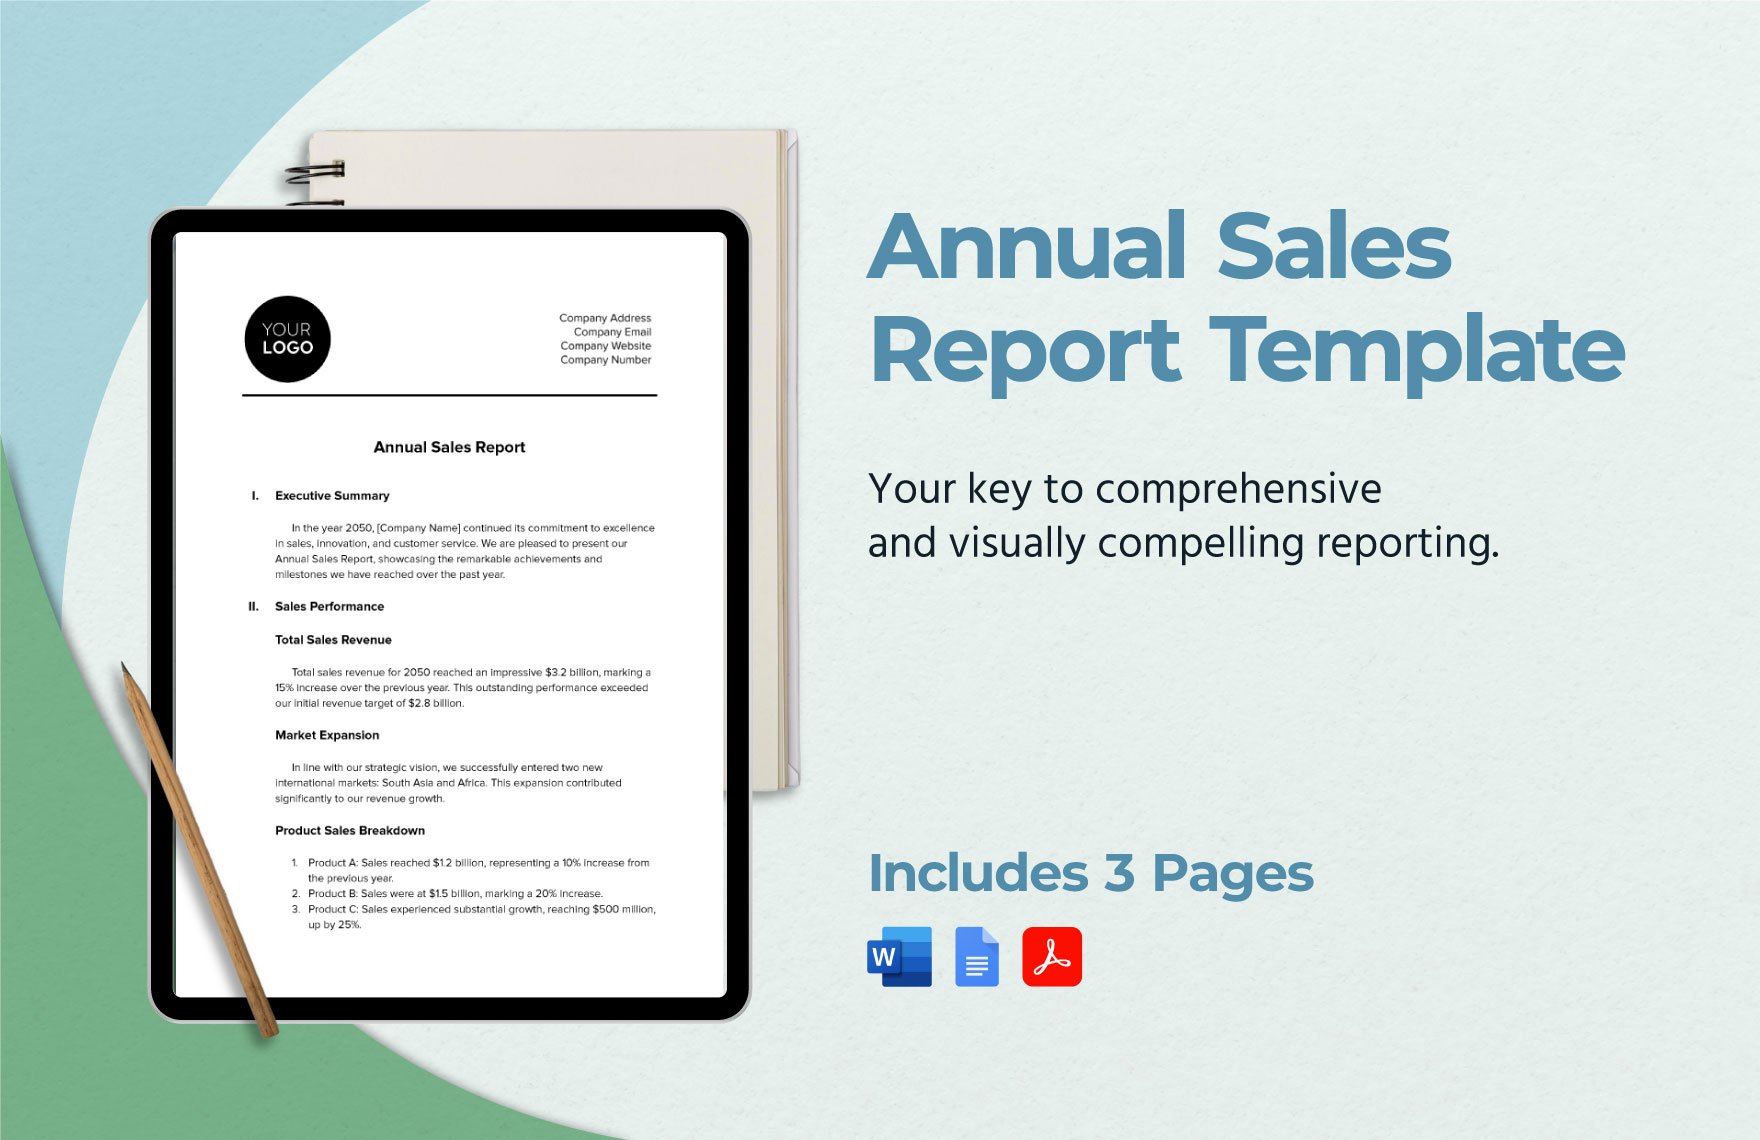 Annual Sales Report Template in Word, Google Docs, PDF